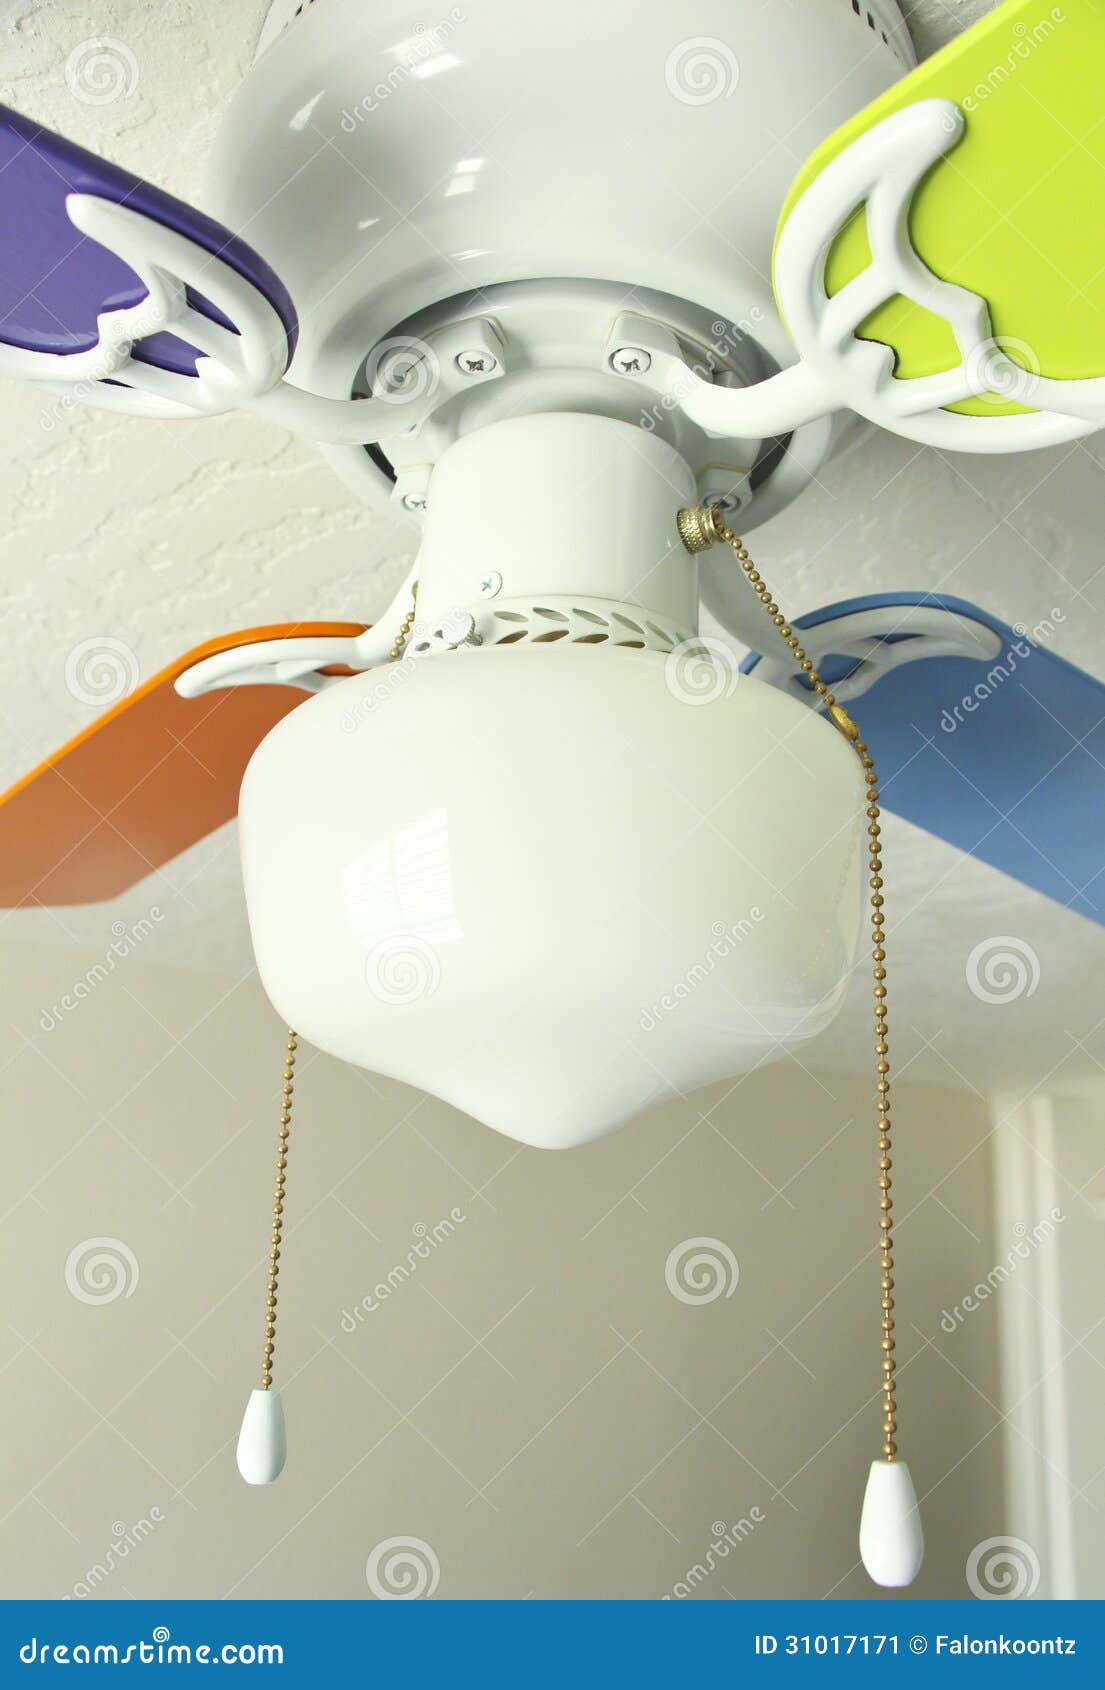 Multi Colored Ceiling Fan Stock Image Image Of Electrical